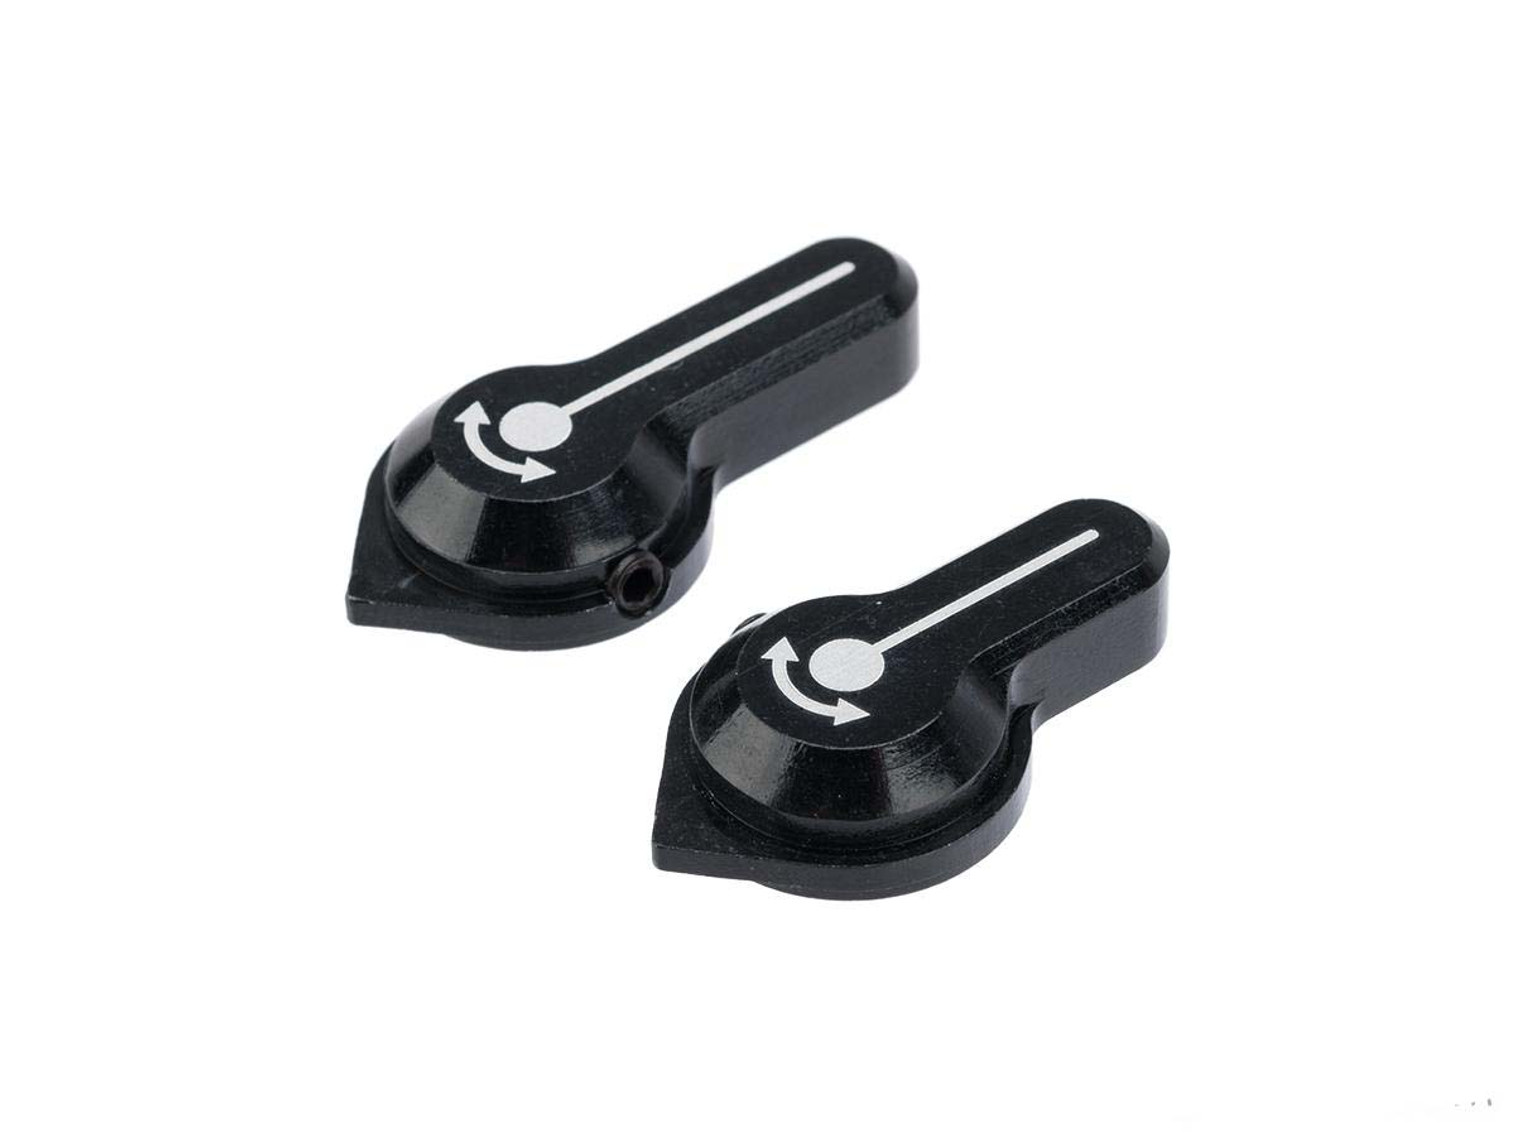 Maxx Model CNC Aluminum Low Profile Selector Levers for VFC SCAR Airsoft AEGs (Model: Style A)